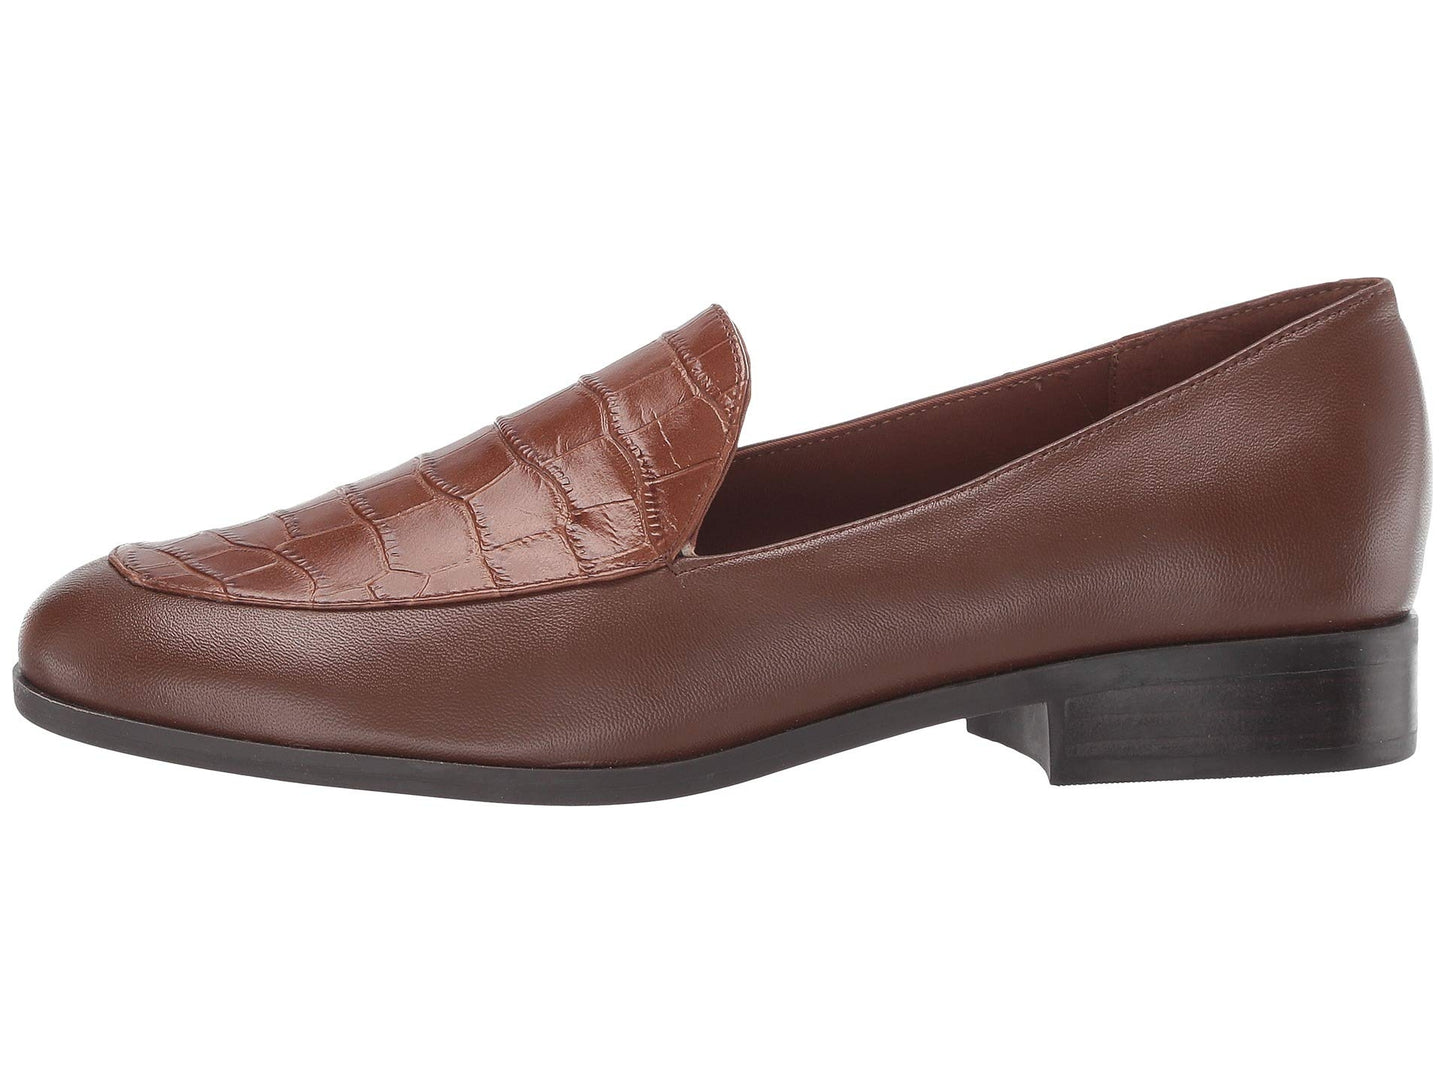 Pip Brown Leather Easy Spirit Loafer Flat